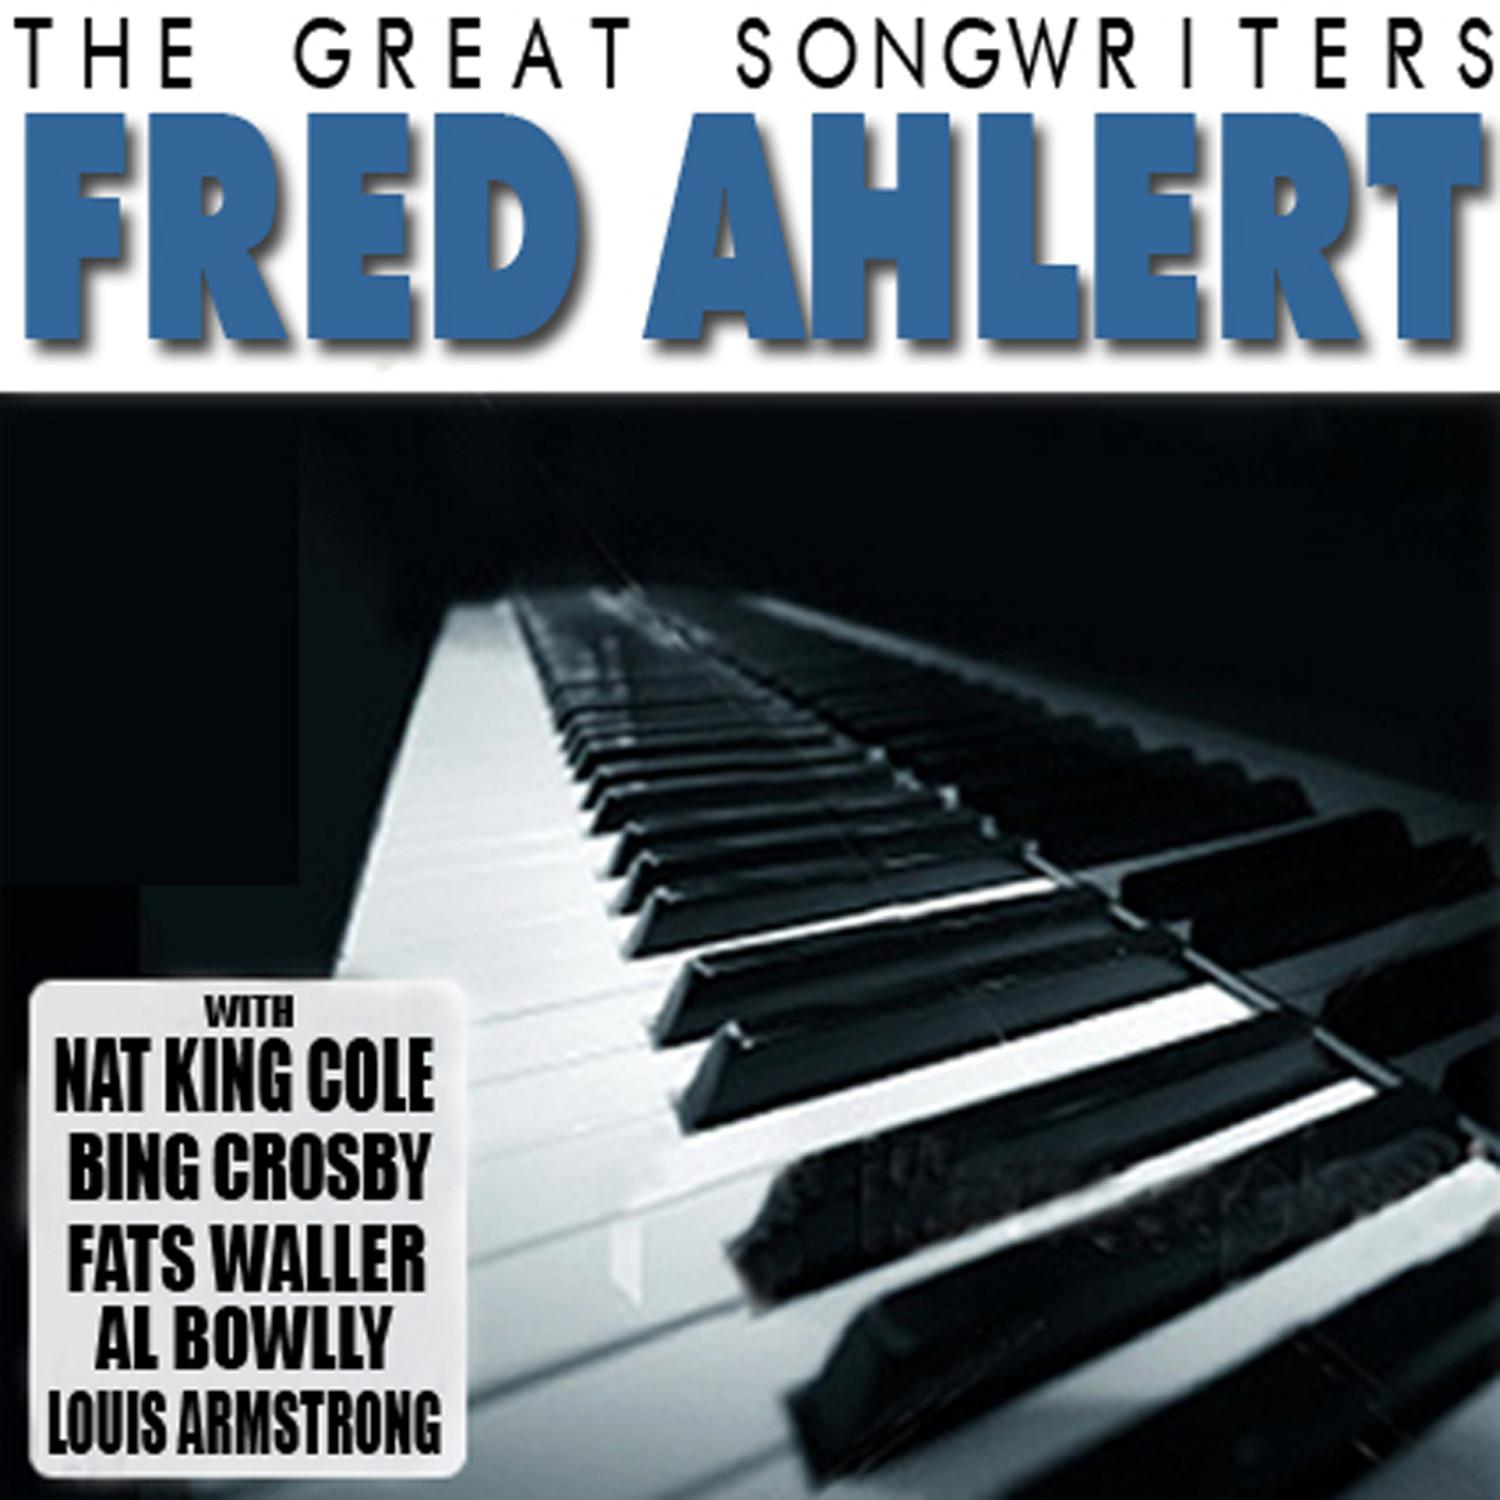 The Great Songwriters - Fred Ahlert